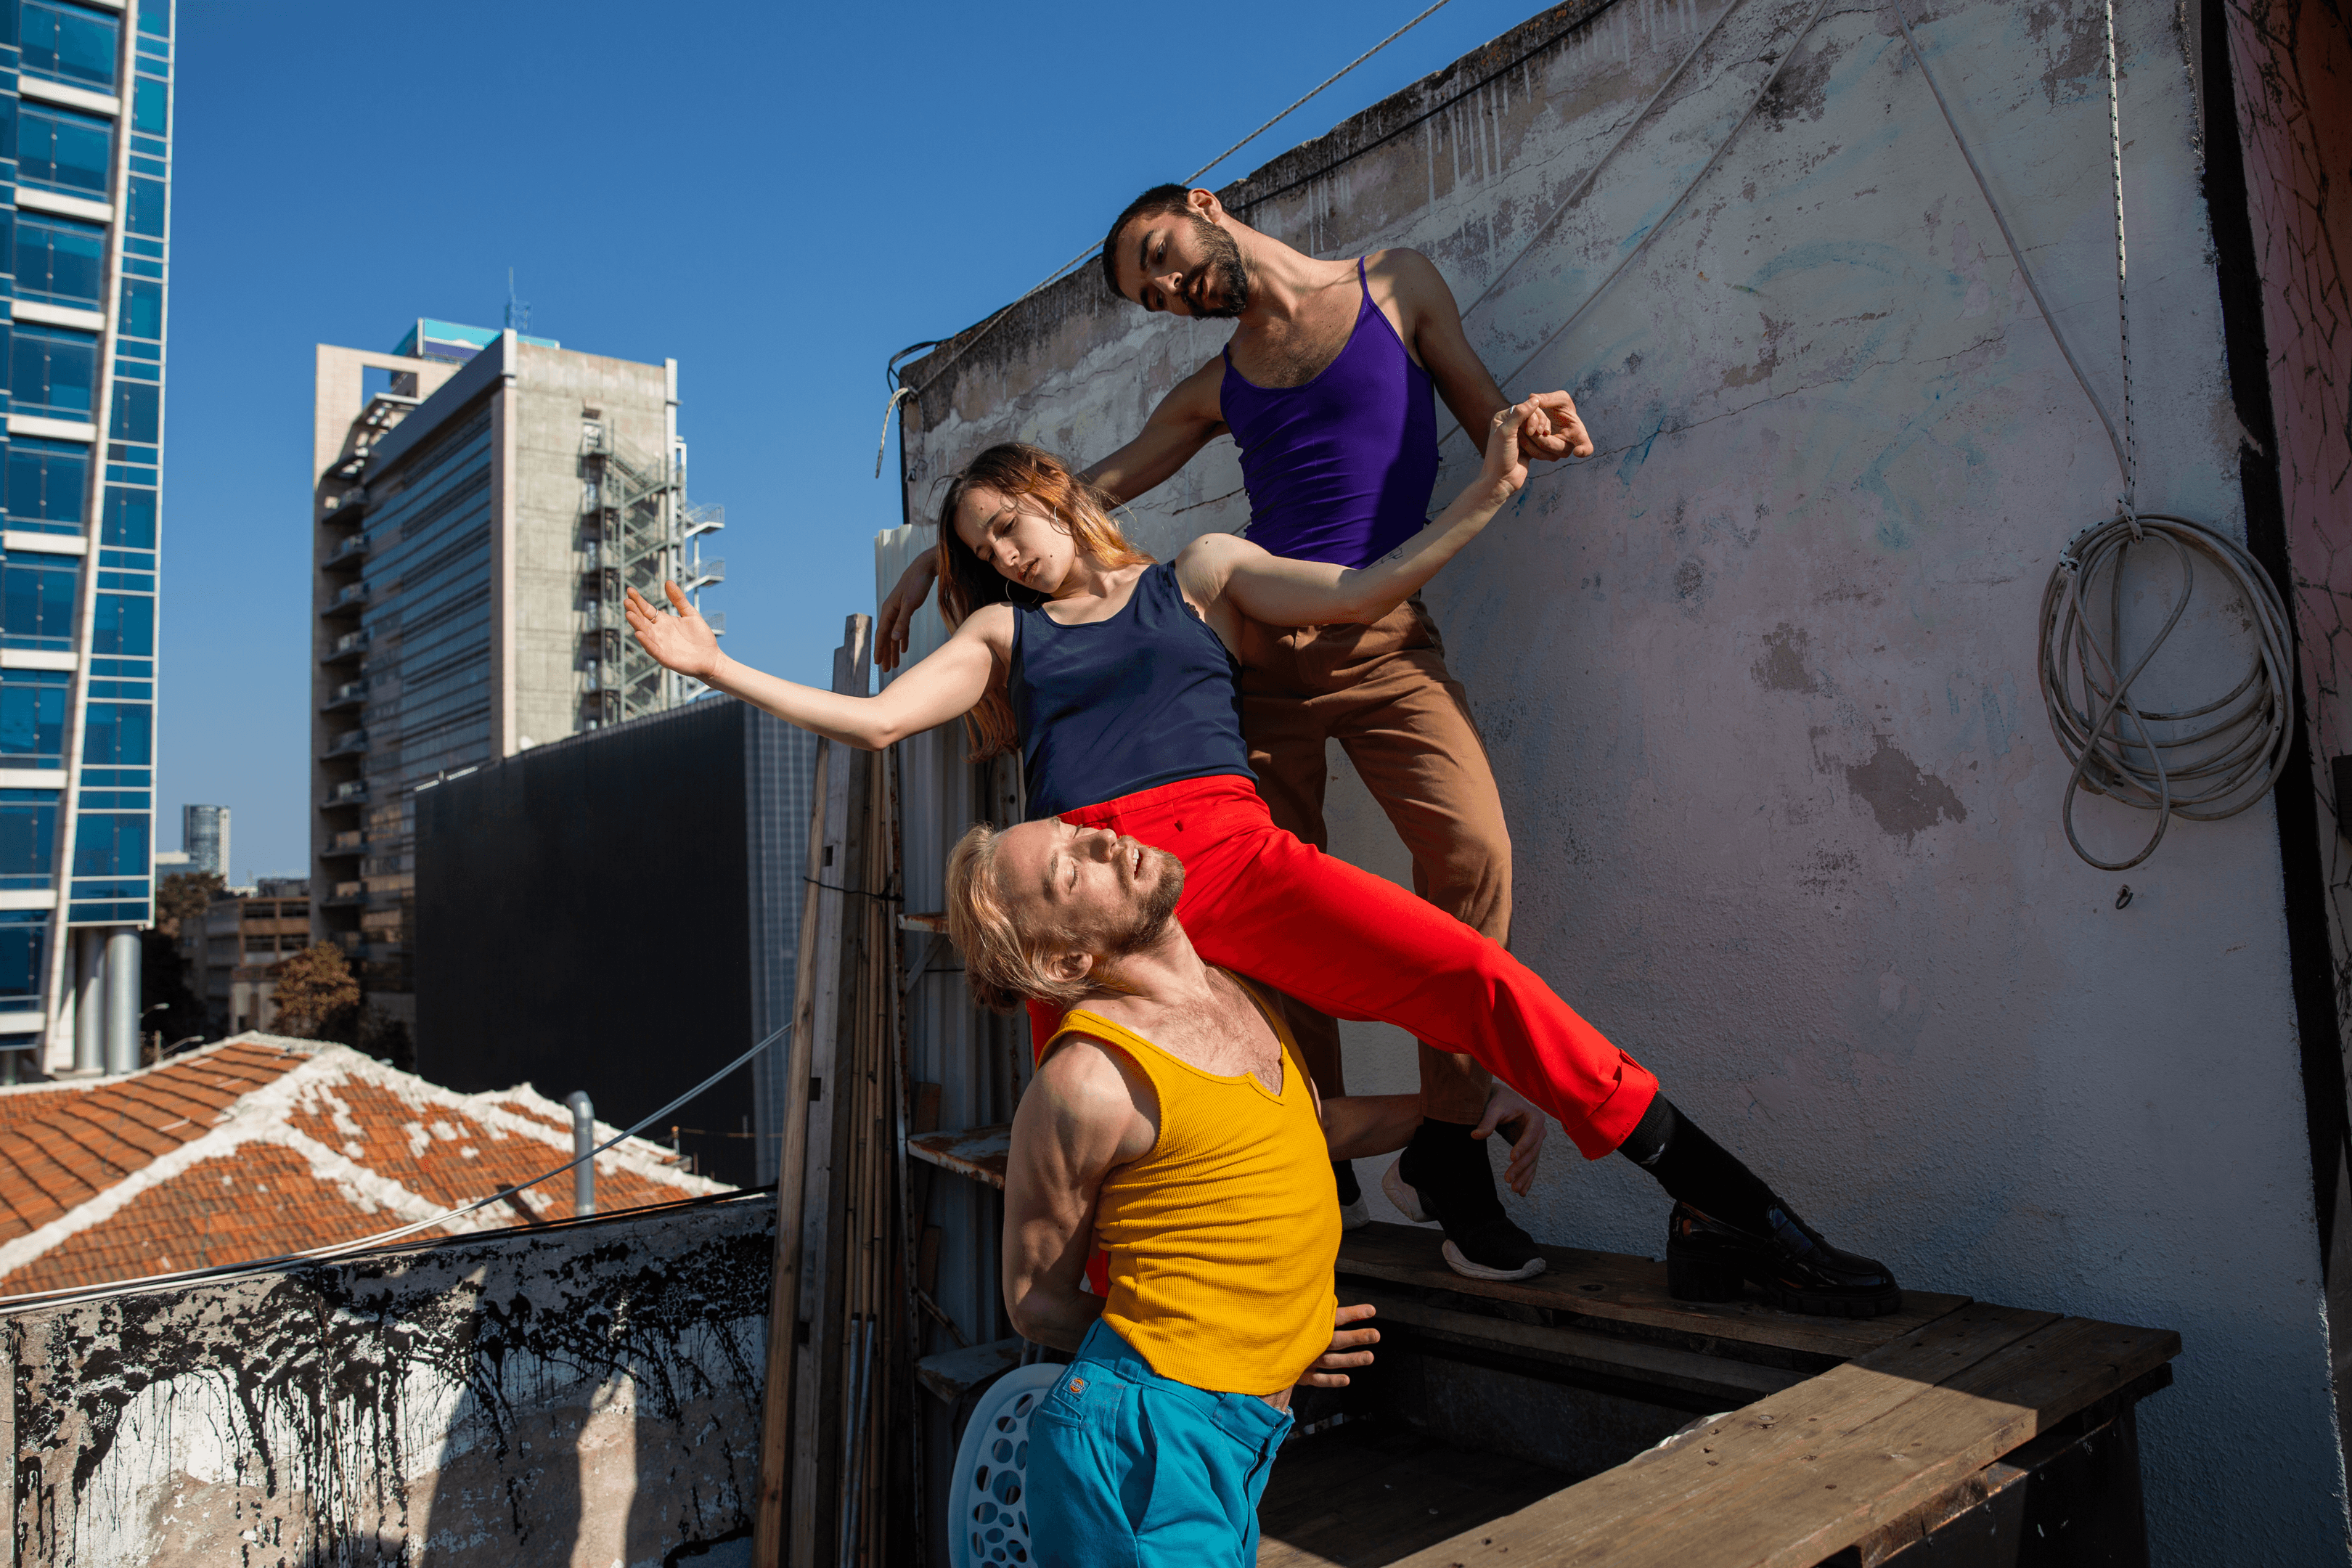 Dancers on Rooftops #115 - Billy, Gianni and Danai (Israel, 2022)